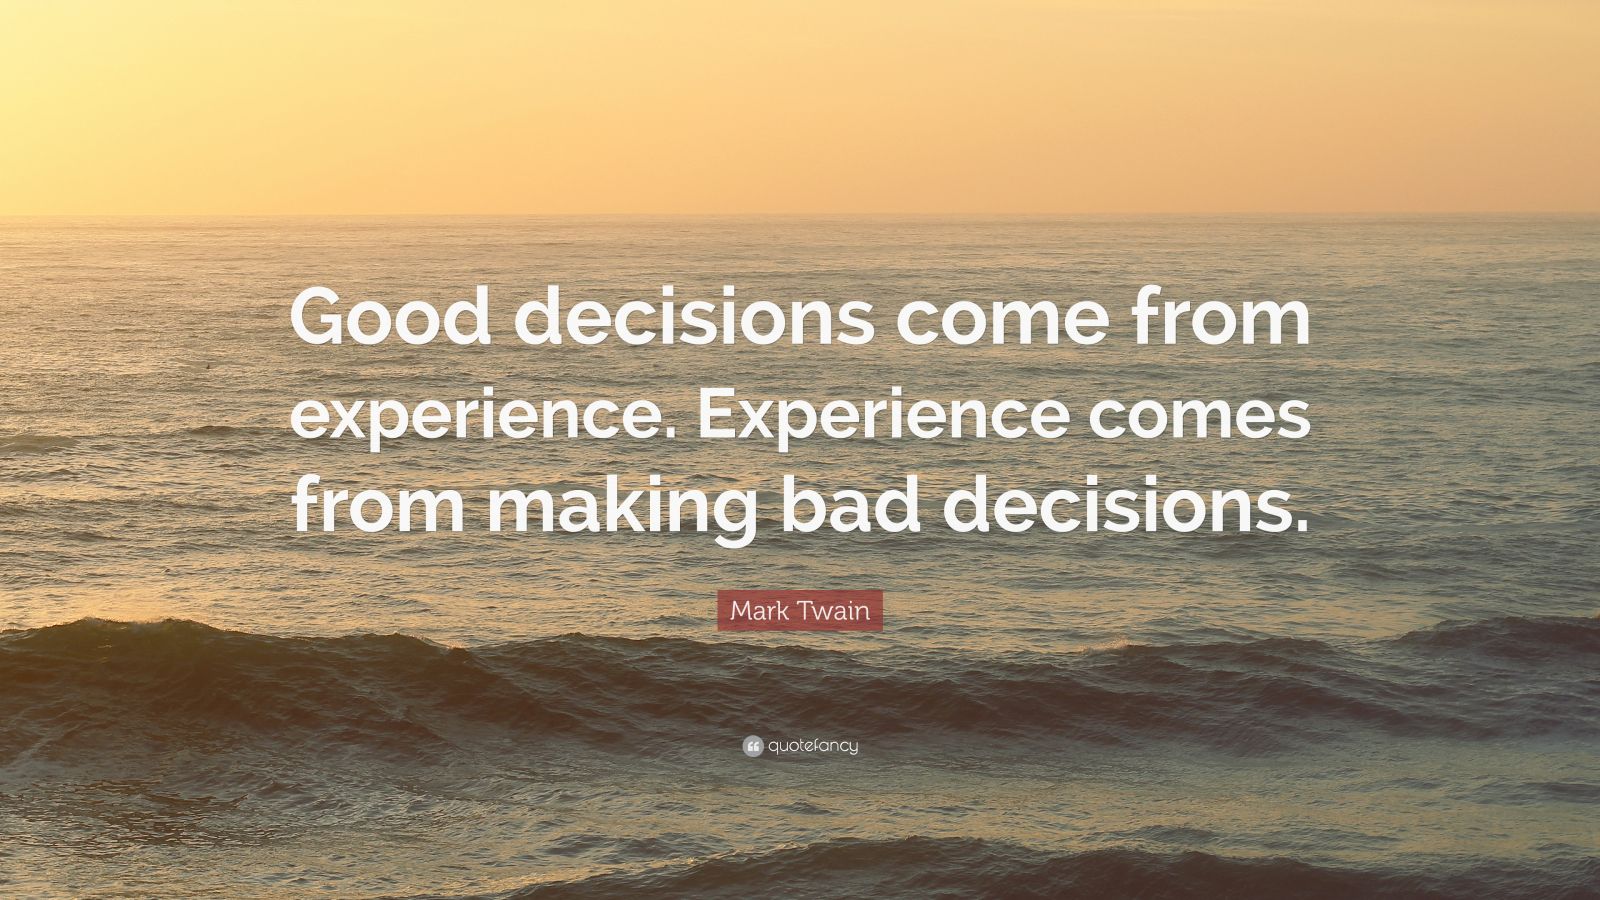 Mark Twain Quote “Good decisions come from experience. Experience